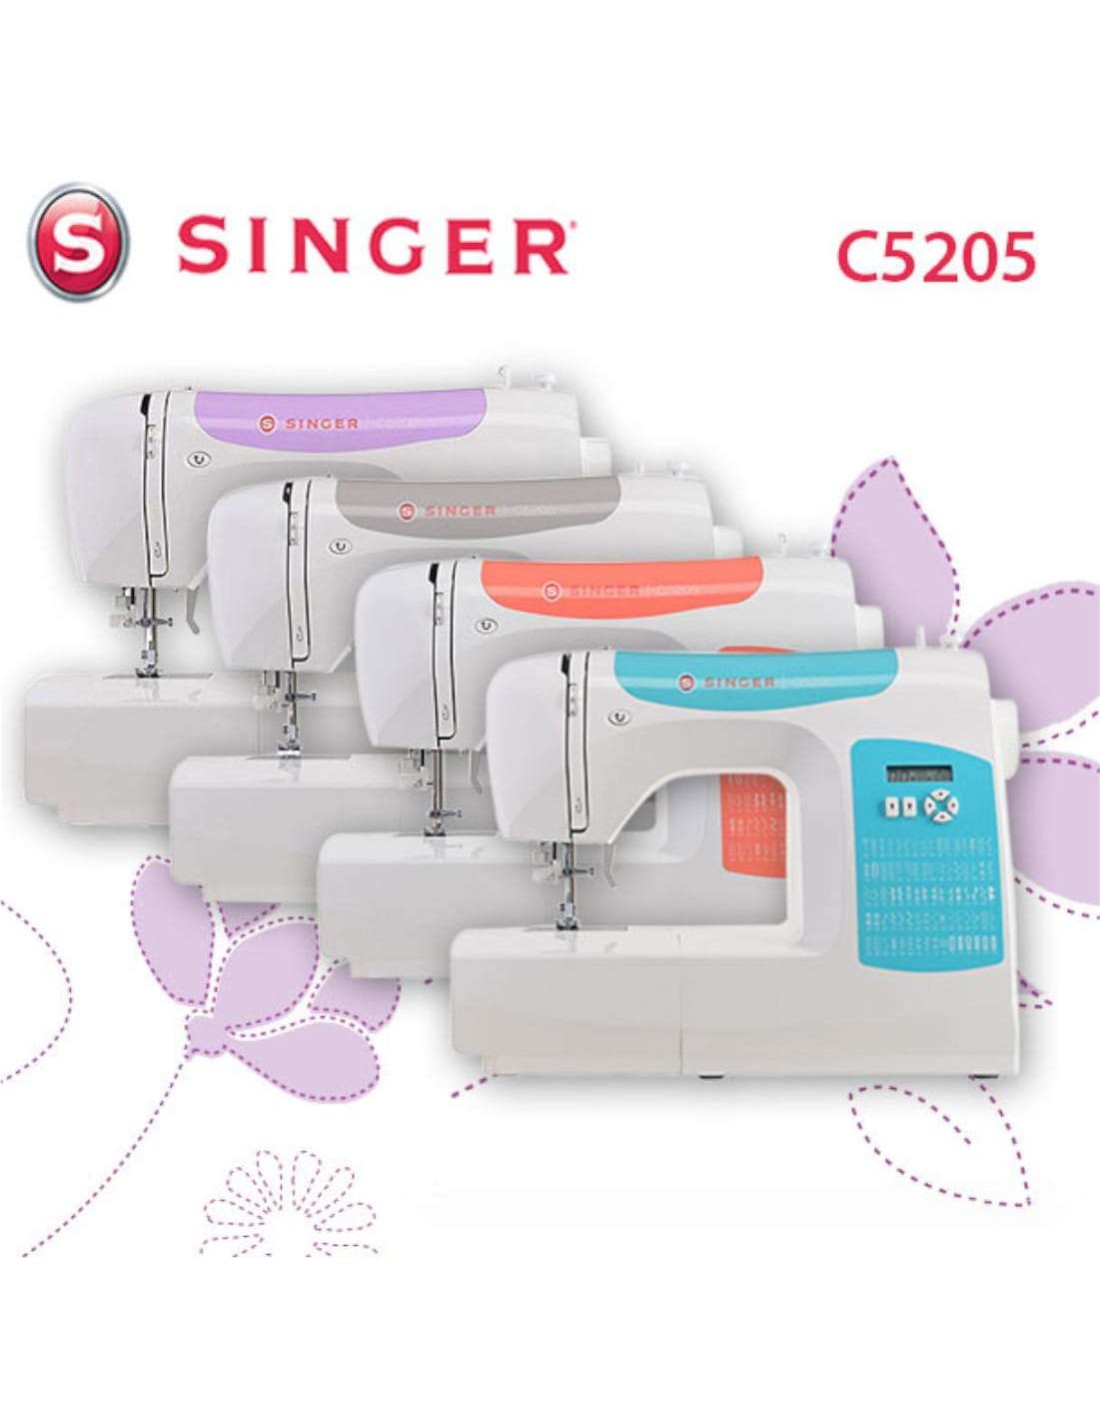 Computerized Sewing Singer C5205 Machine